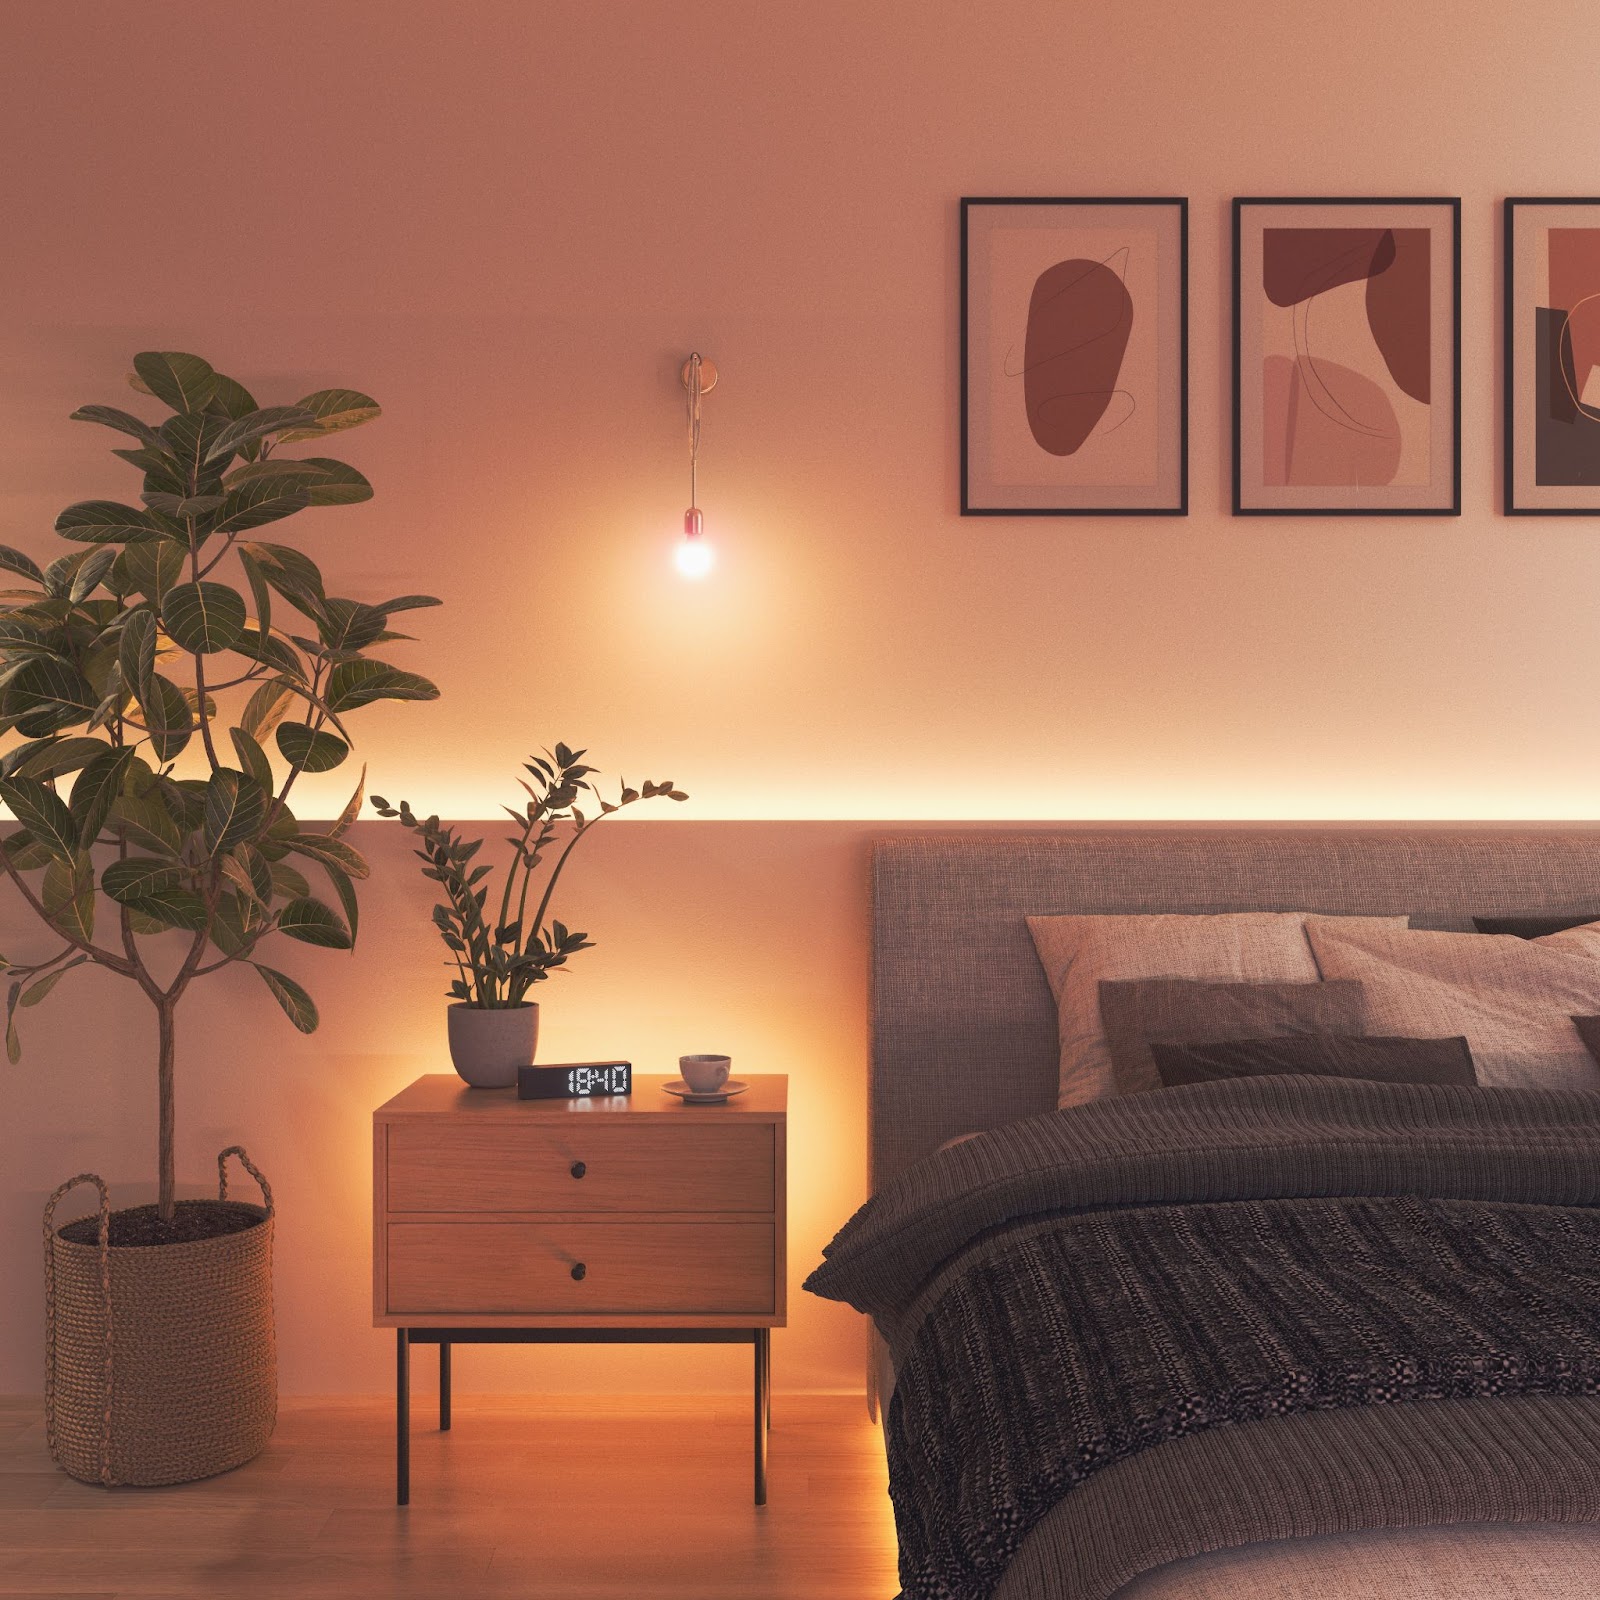 Nanoleaf Essentials Bulb in a bedroom with warm lighting.